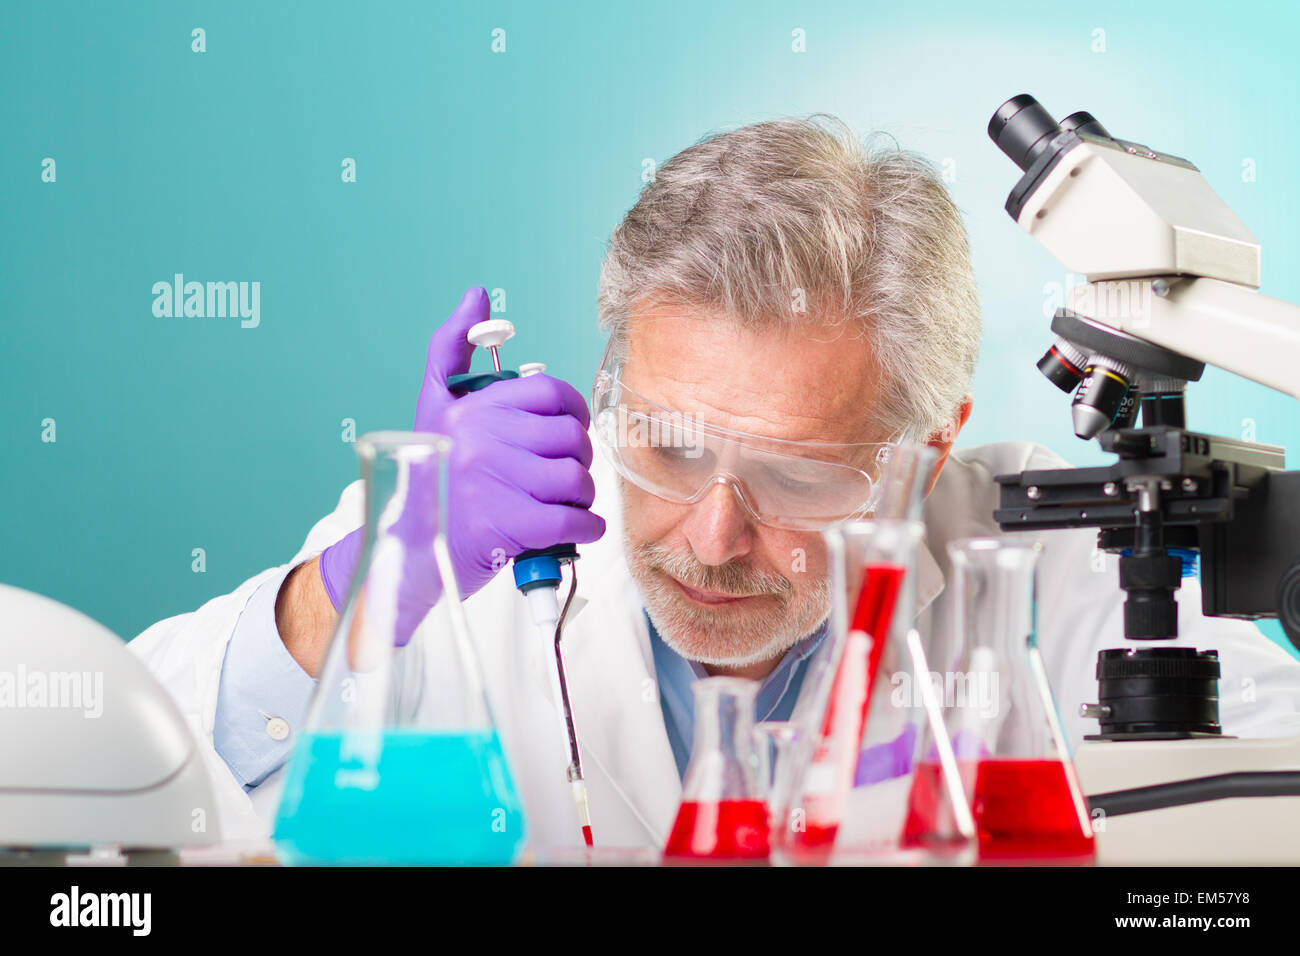 Life science research. Stock Photo